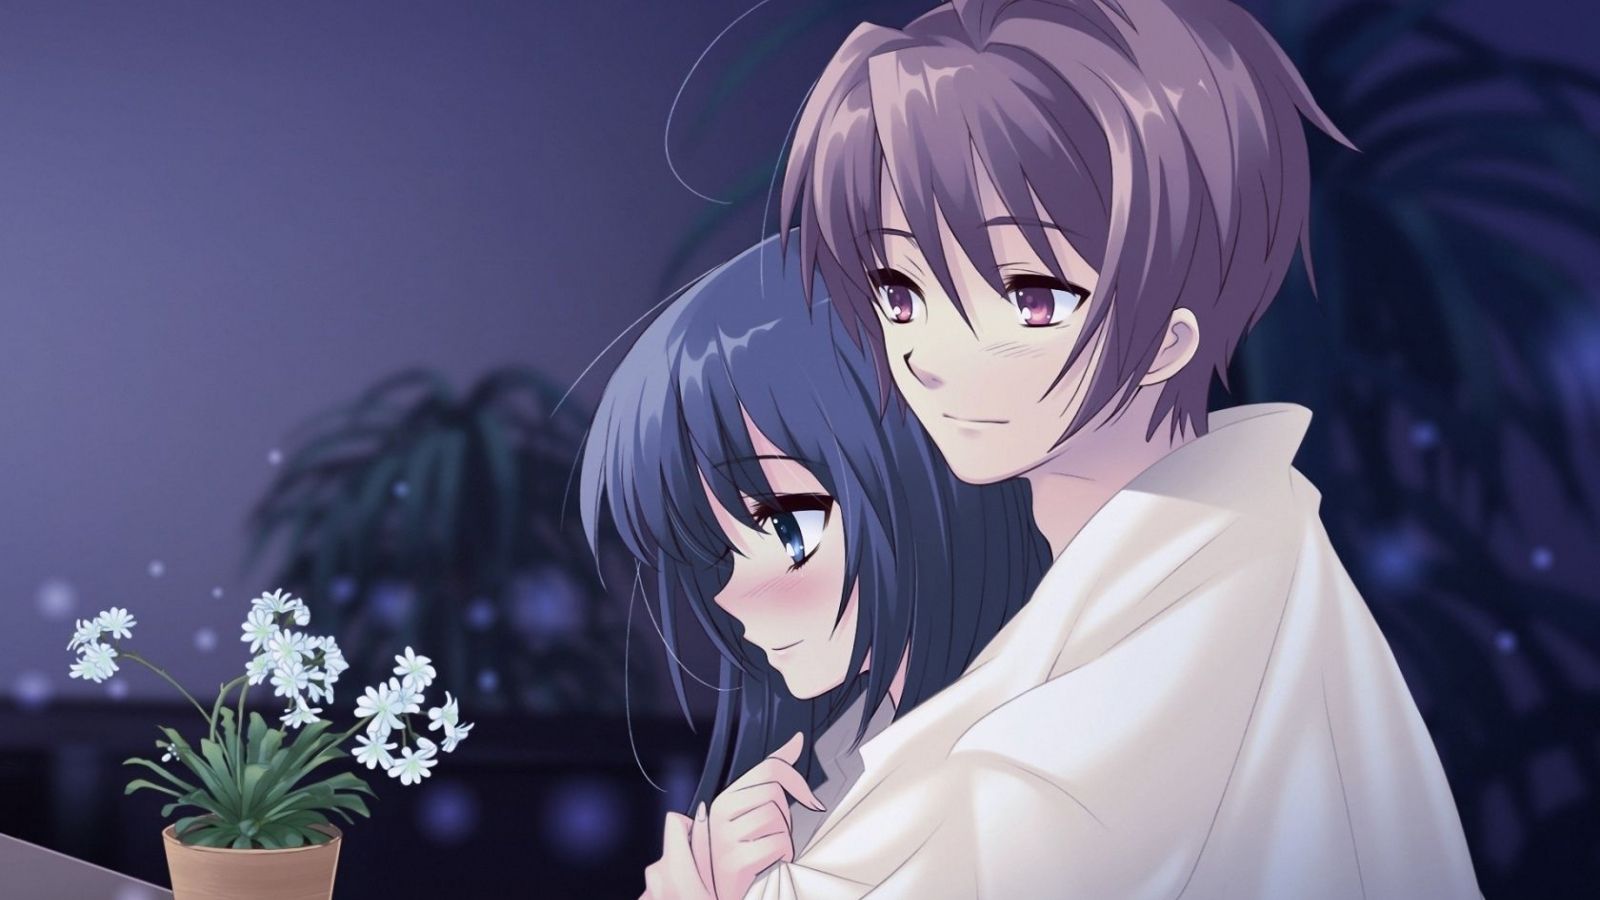 Free download Anime Boy and Girl Love Anime Boy And Girl 1680 x 1050 [1680x1050] for your Desktop, Mobile & Tablet. Explore Cute Anime Boys Wallpaper. Cute Anime Boys